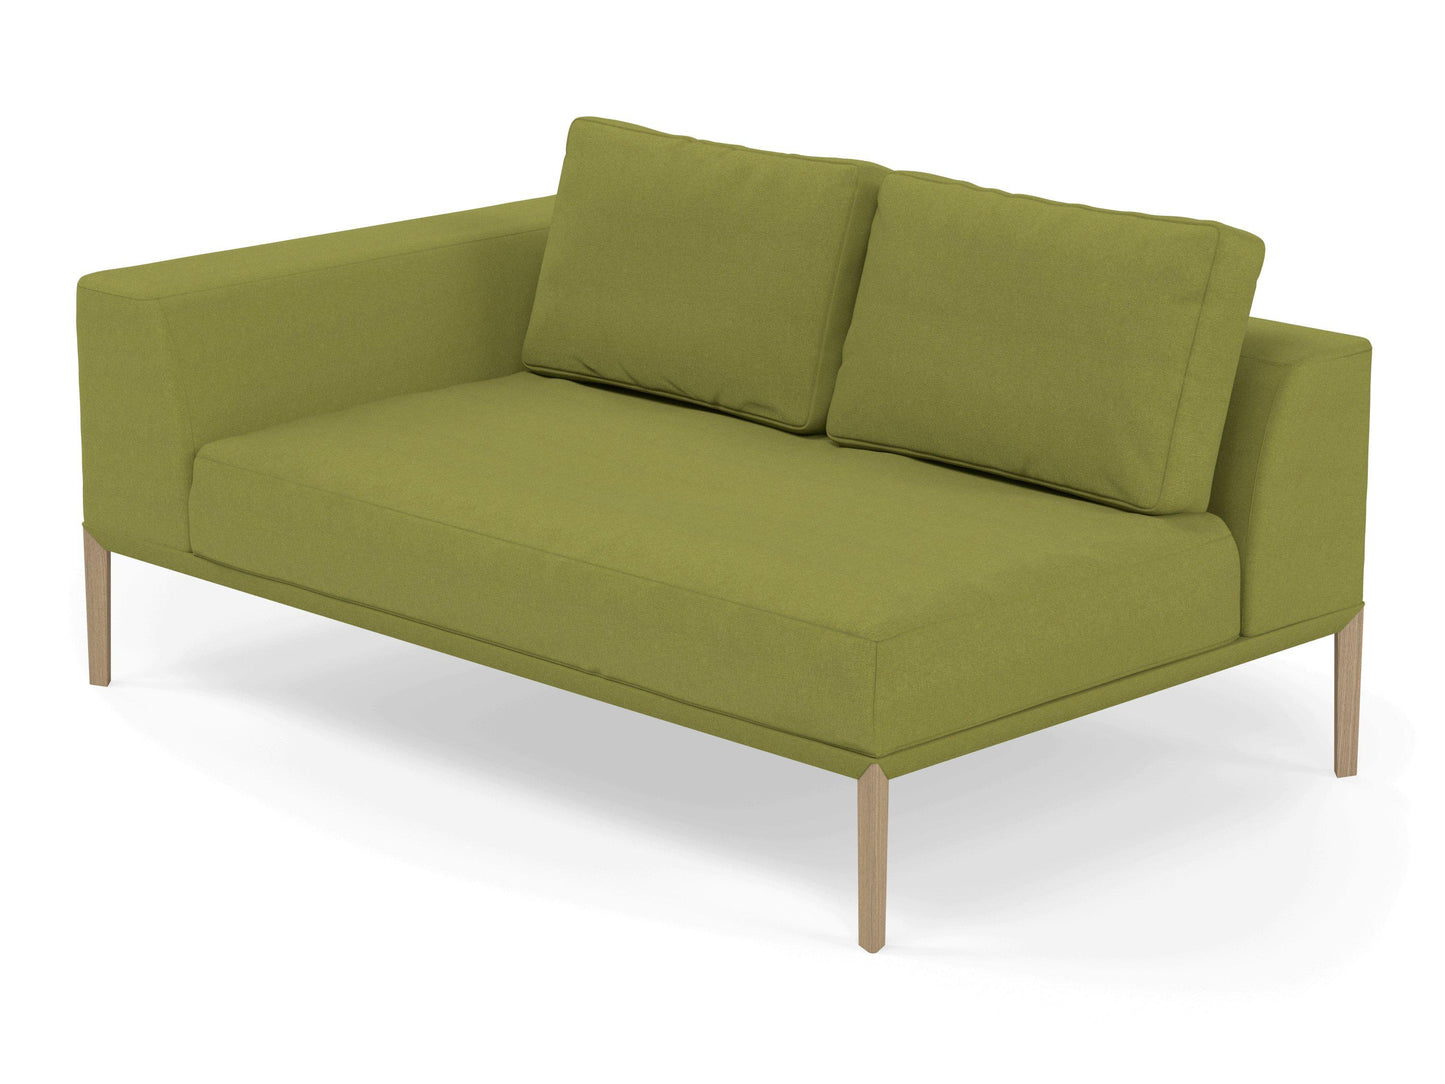 Modern 2 Seater Chaise Lounge Style Sofa with Right Armrest in Lime Green Fabric-Distinct Designs (London) Ltd